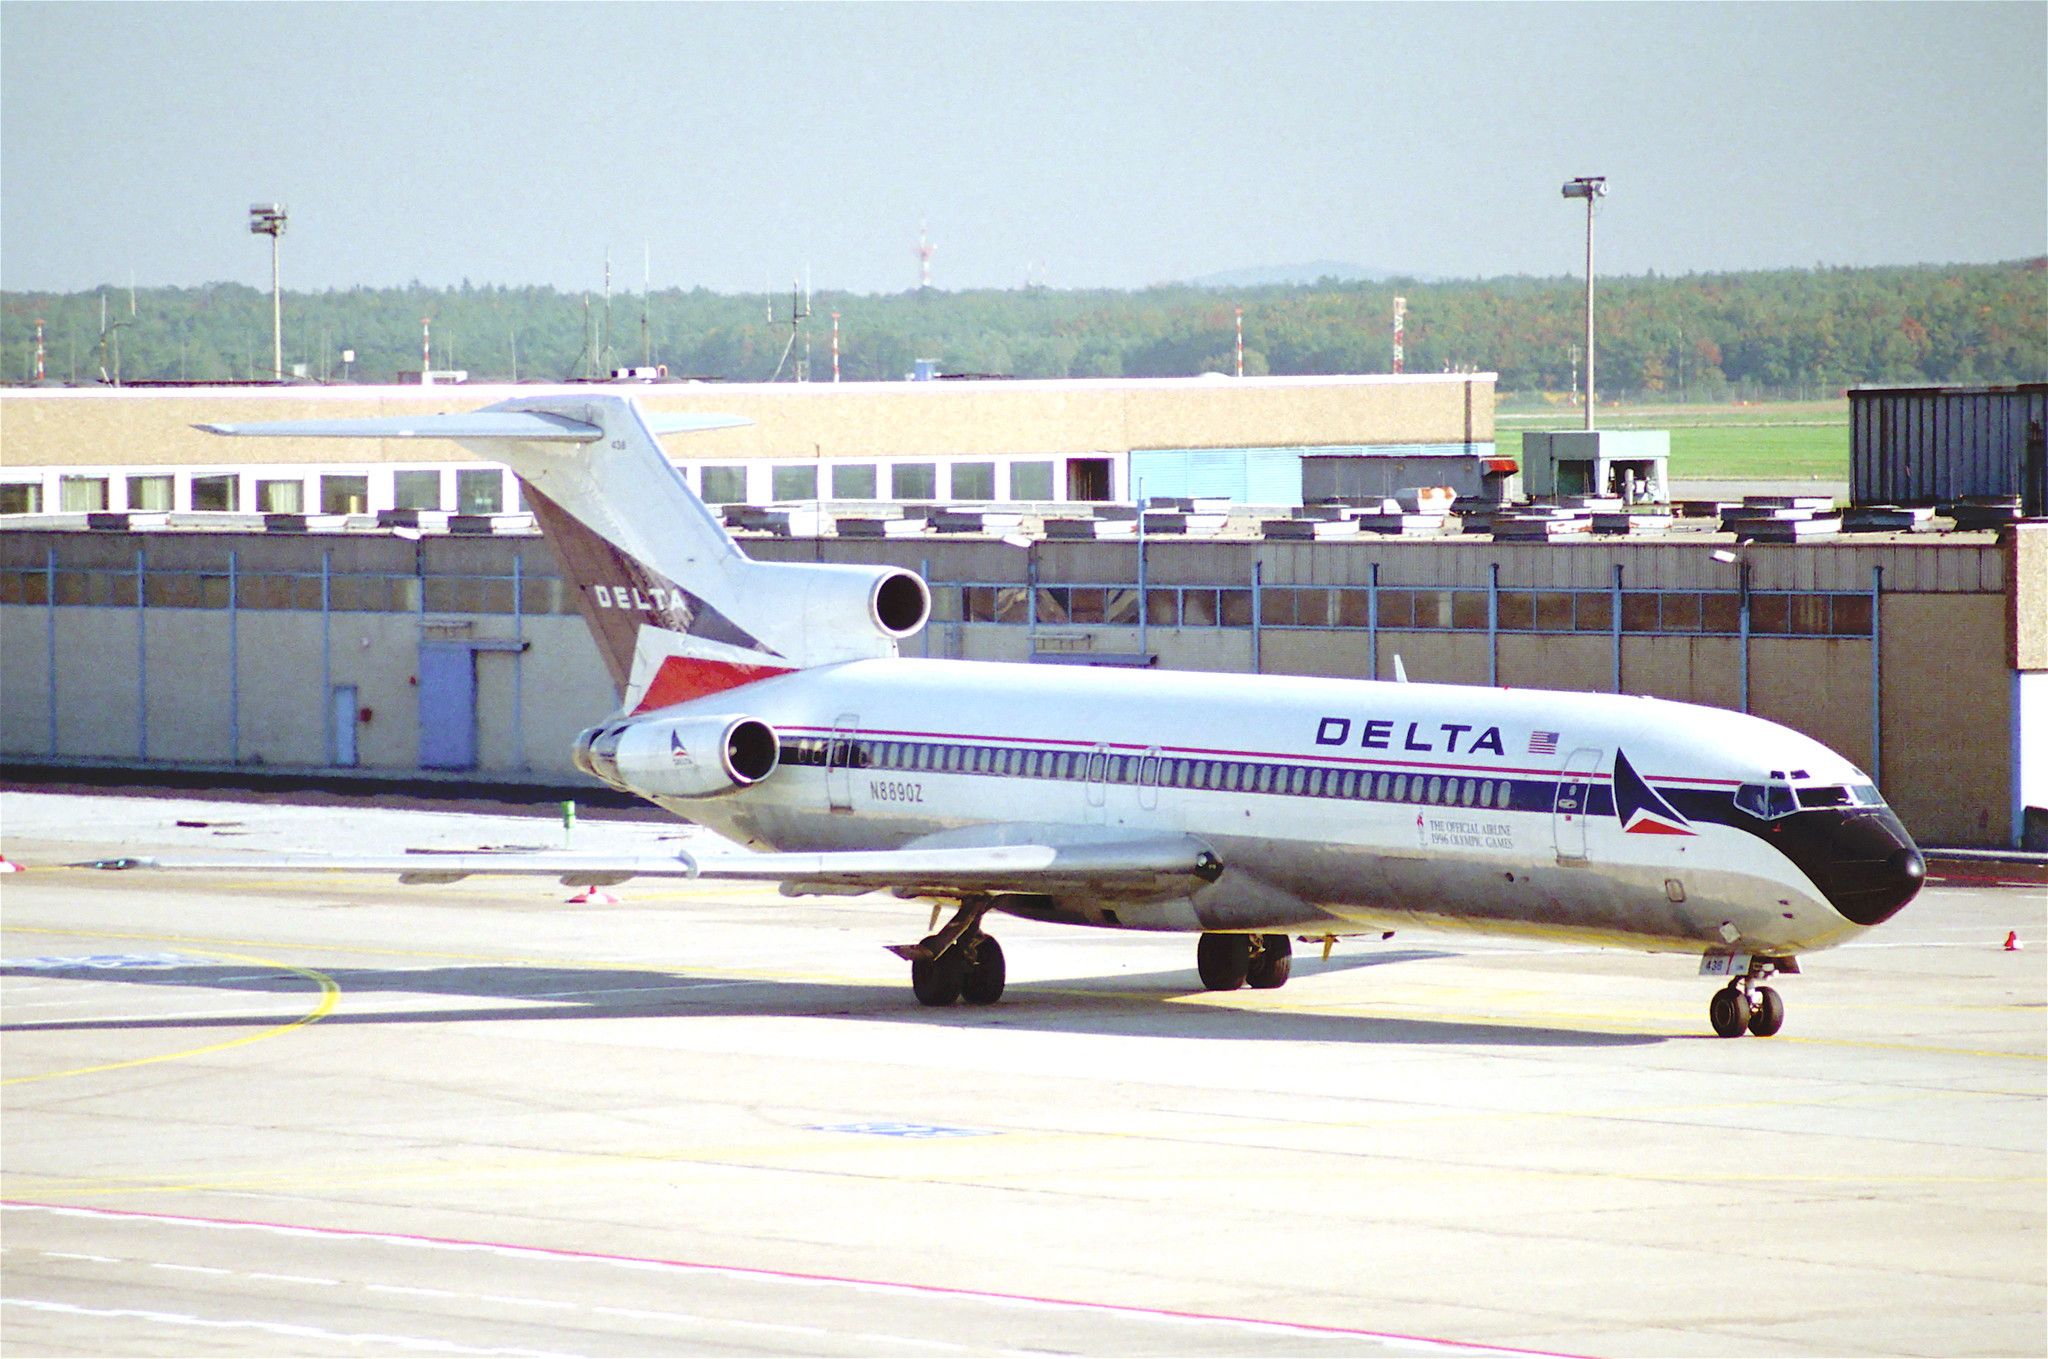 A Delta Air Lines Boeing 727 on an airport apron.